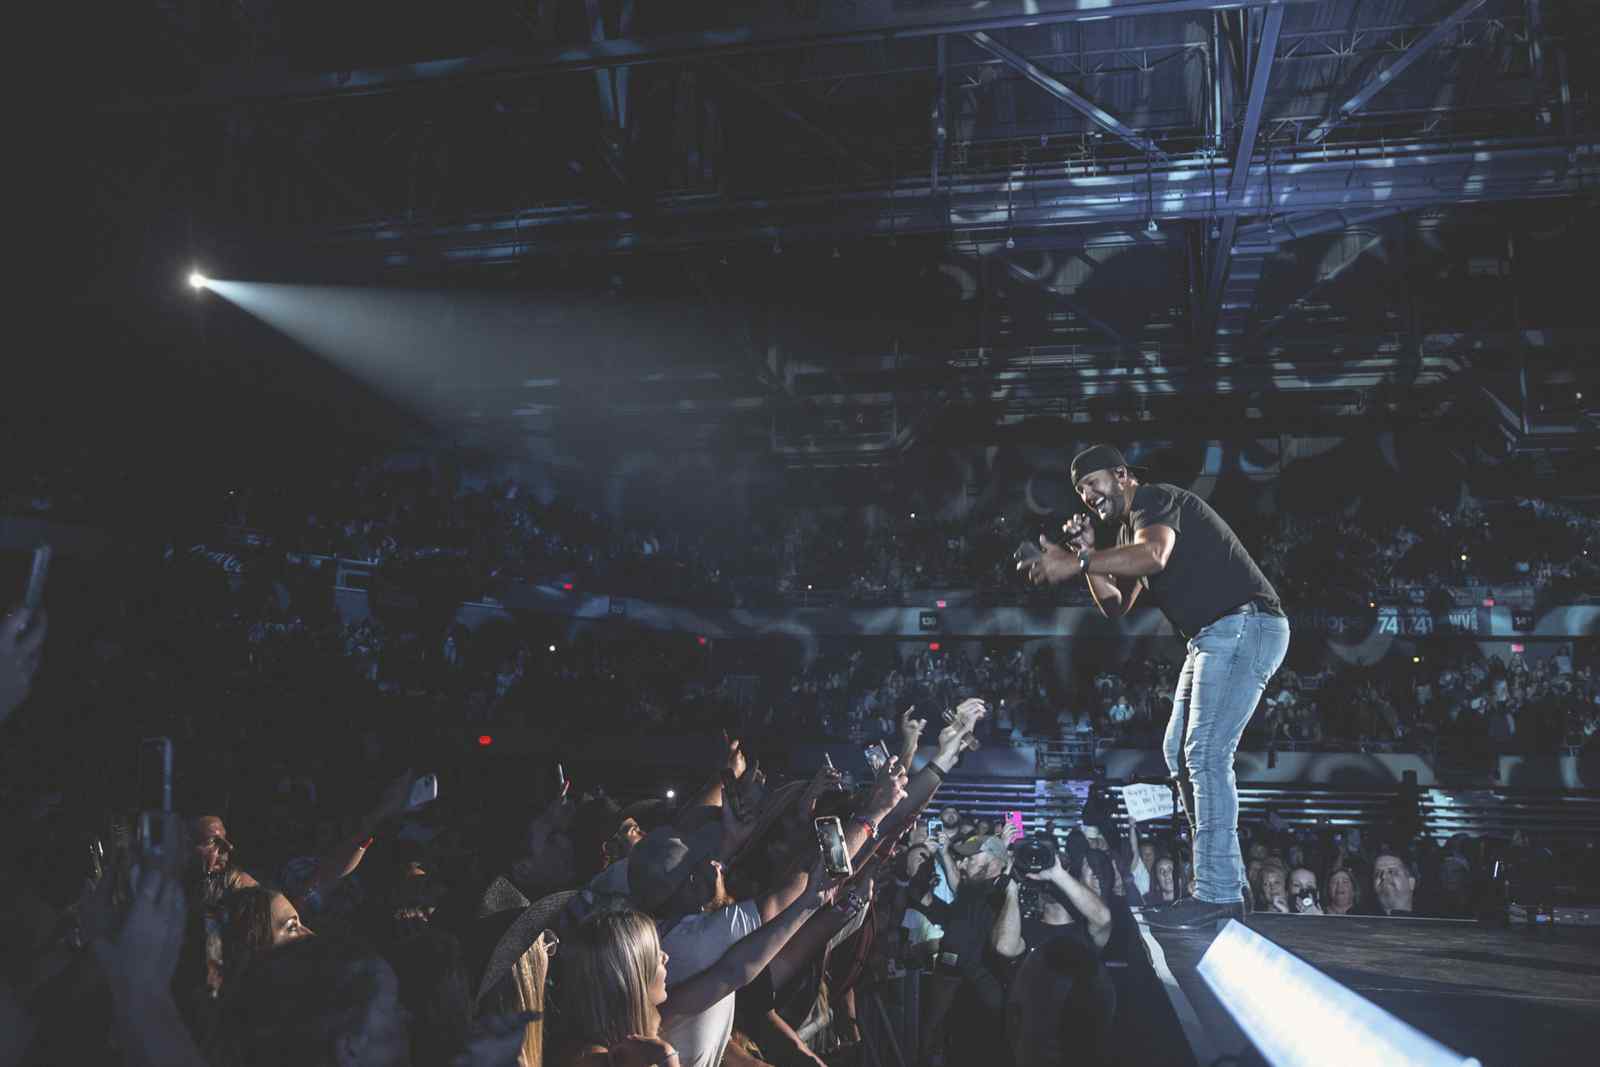 Luke Bryan Launches RAISED UP RIGHT TOUR with Sold-Out Concert